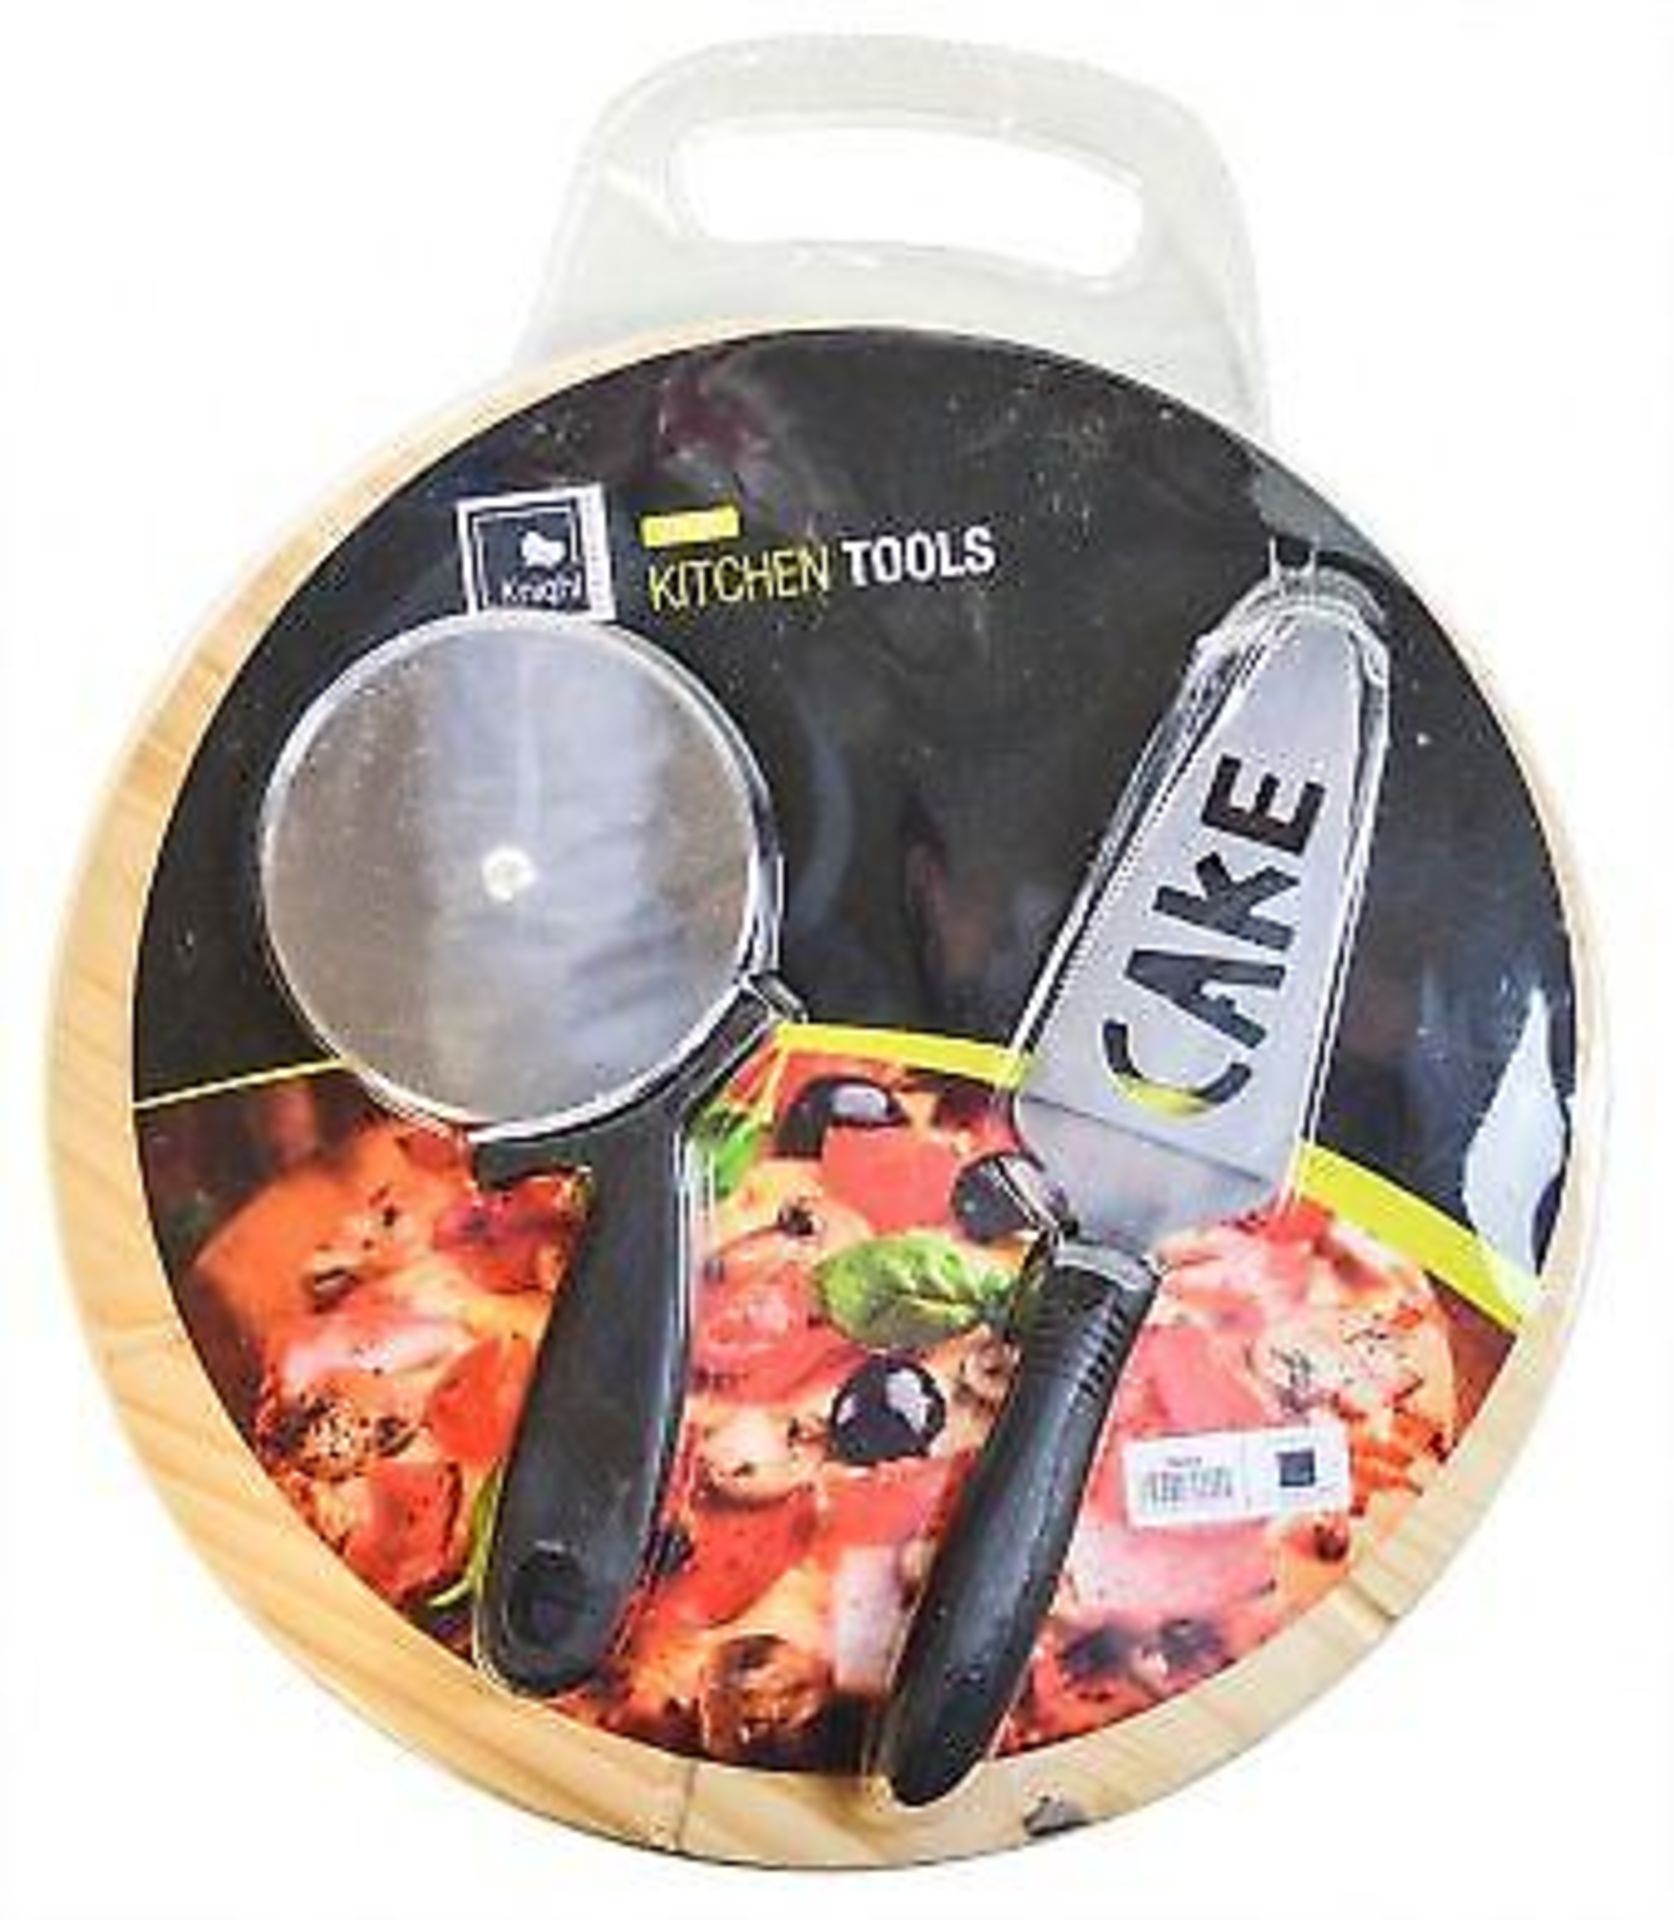 V Brand New Kitchen Tools With Round Wooden Cutting Board - Cake Slice And Pizza Cutter X 2 YOUR BID